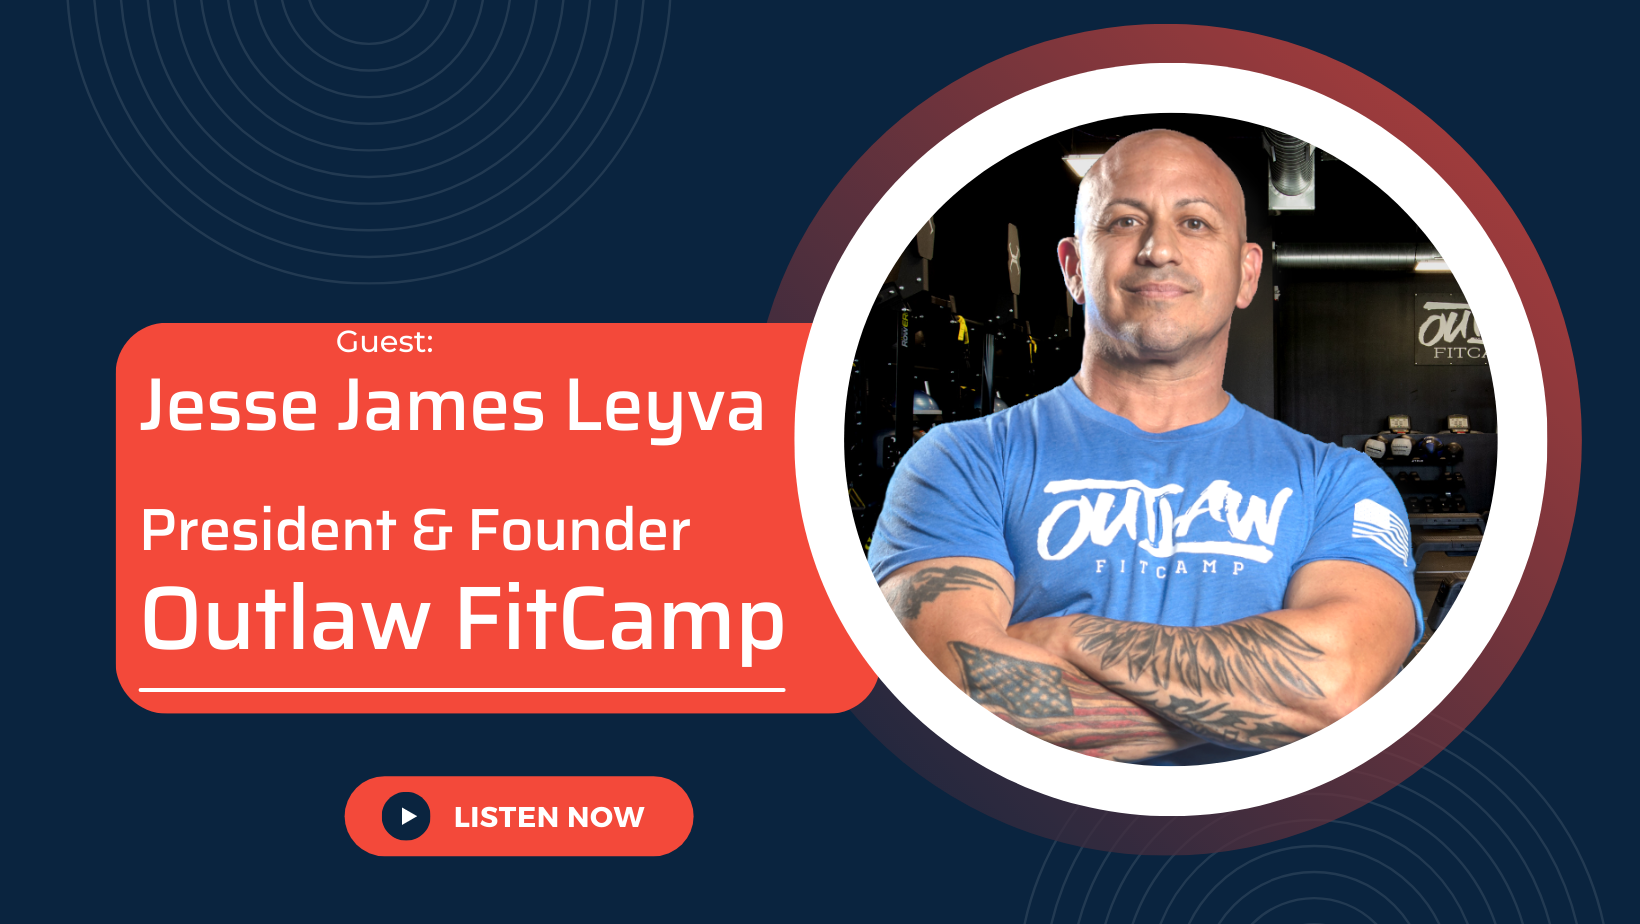 Fitness Business Growth Hacks from the President & Founder of Outlaw FitCamp, Jesse James Leyva